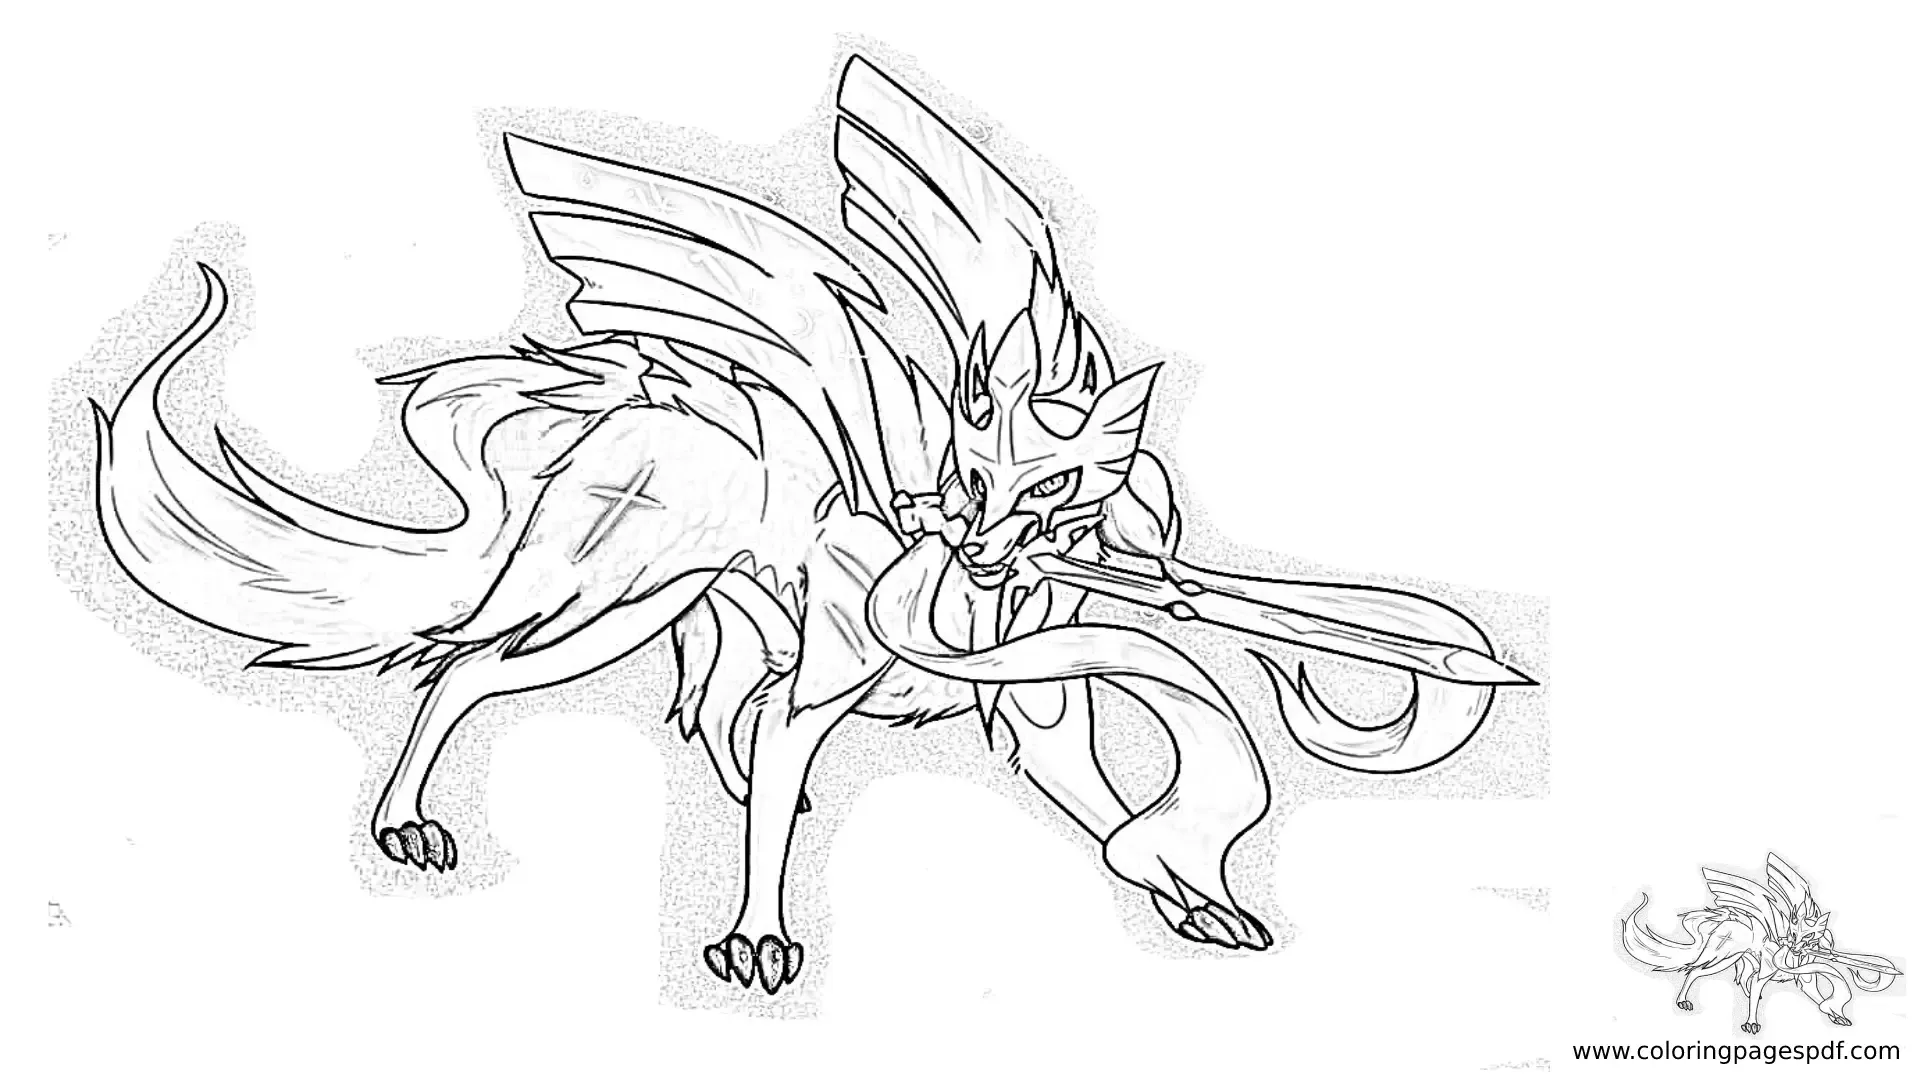 Coloring Page Of Zacian In Attack Form